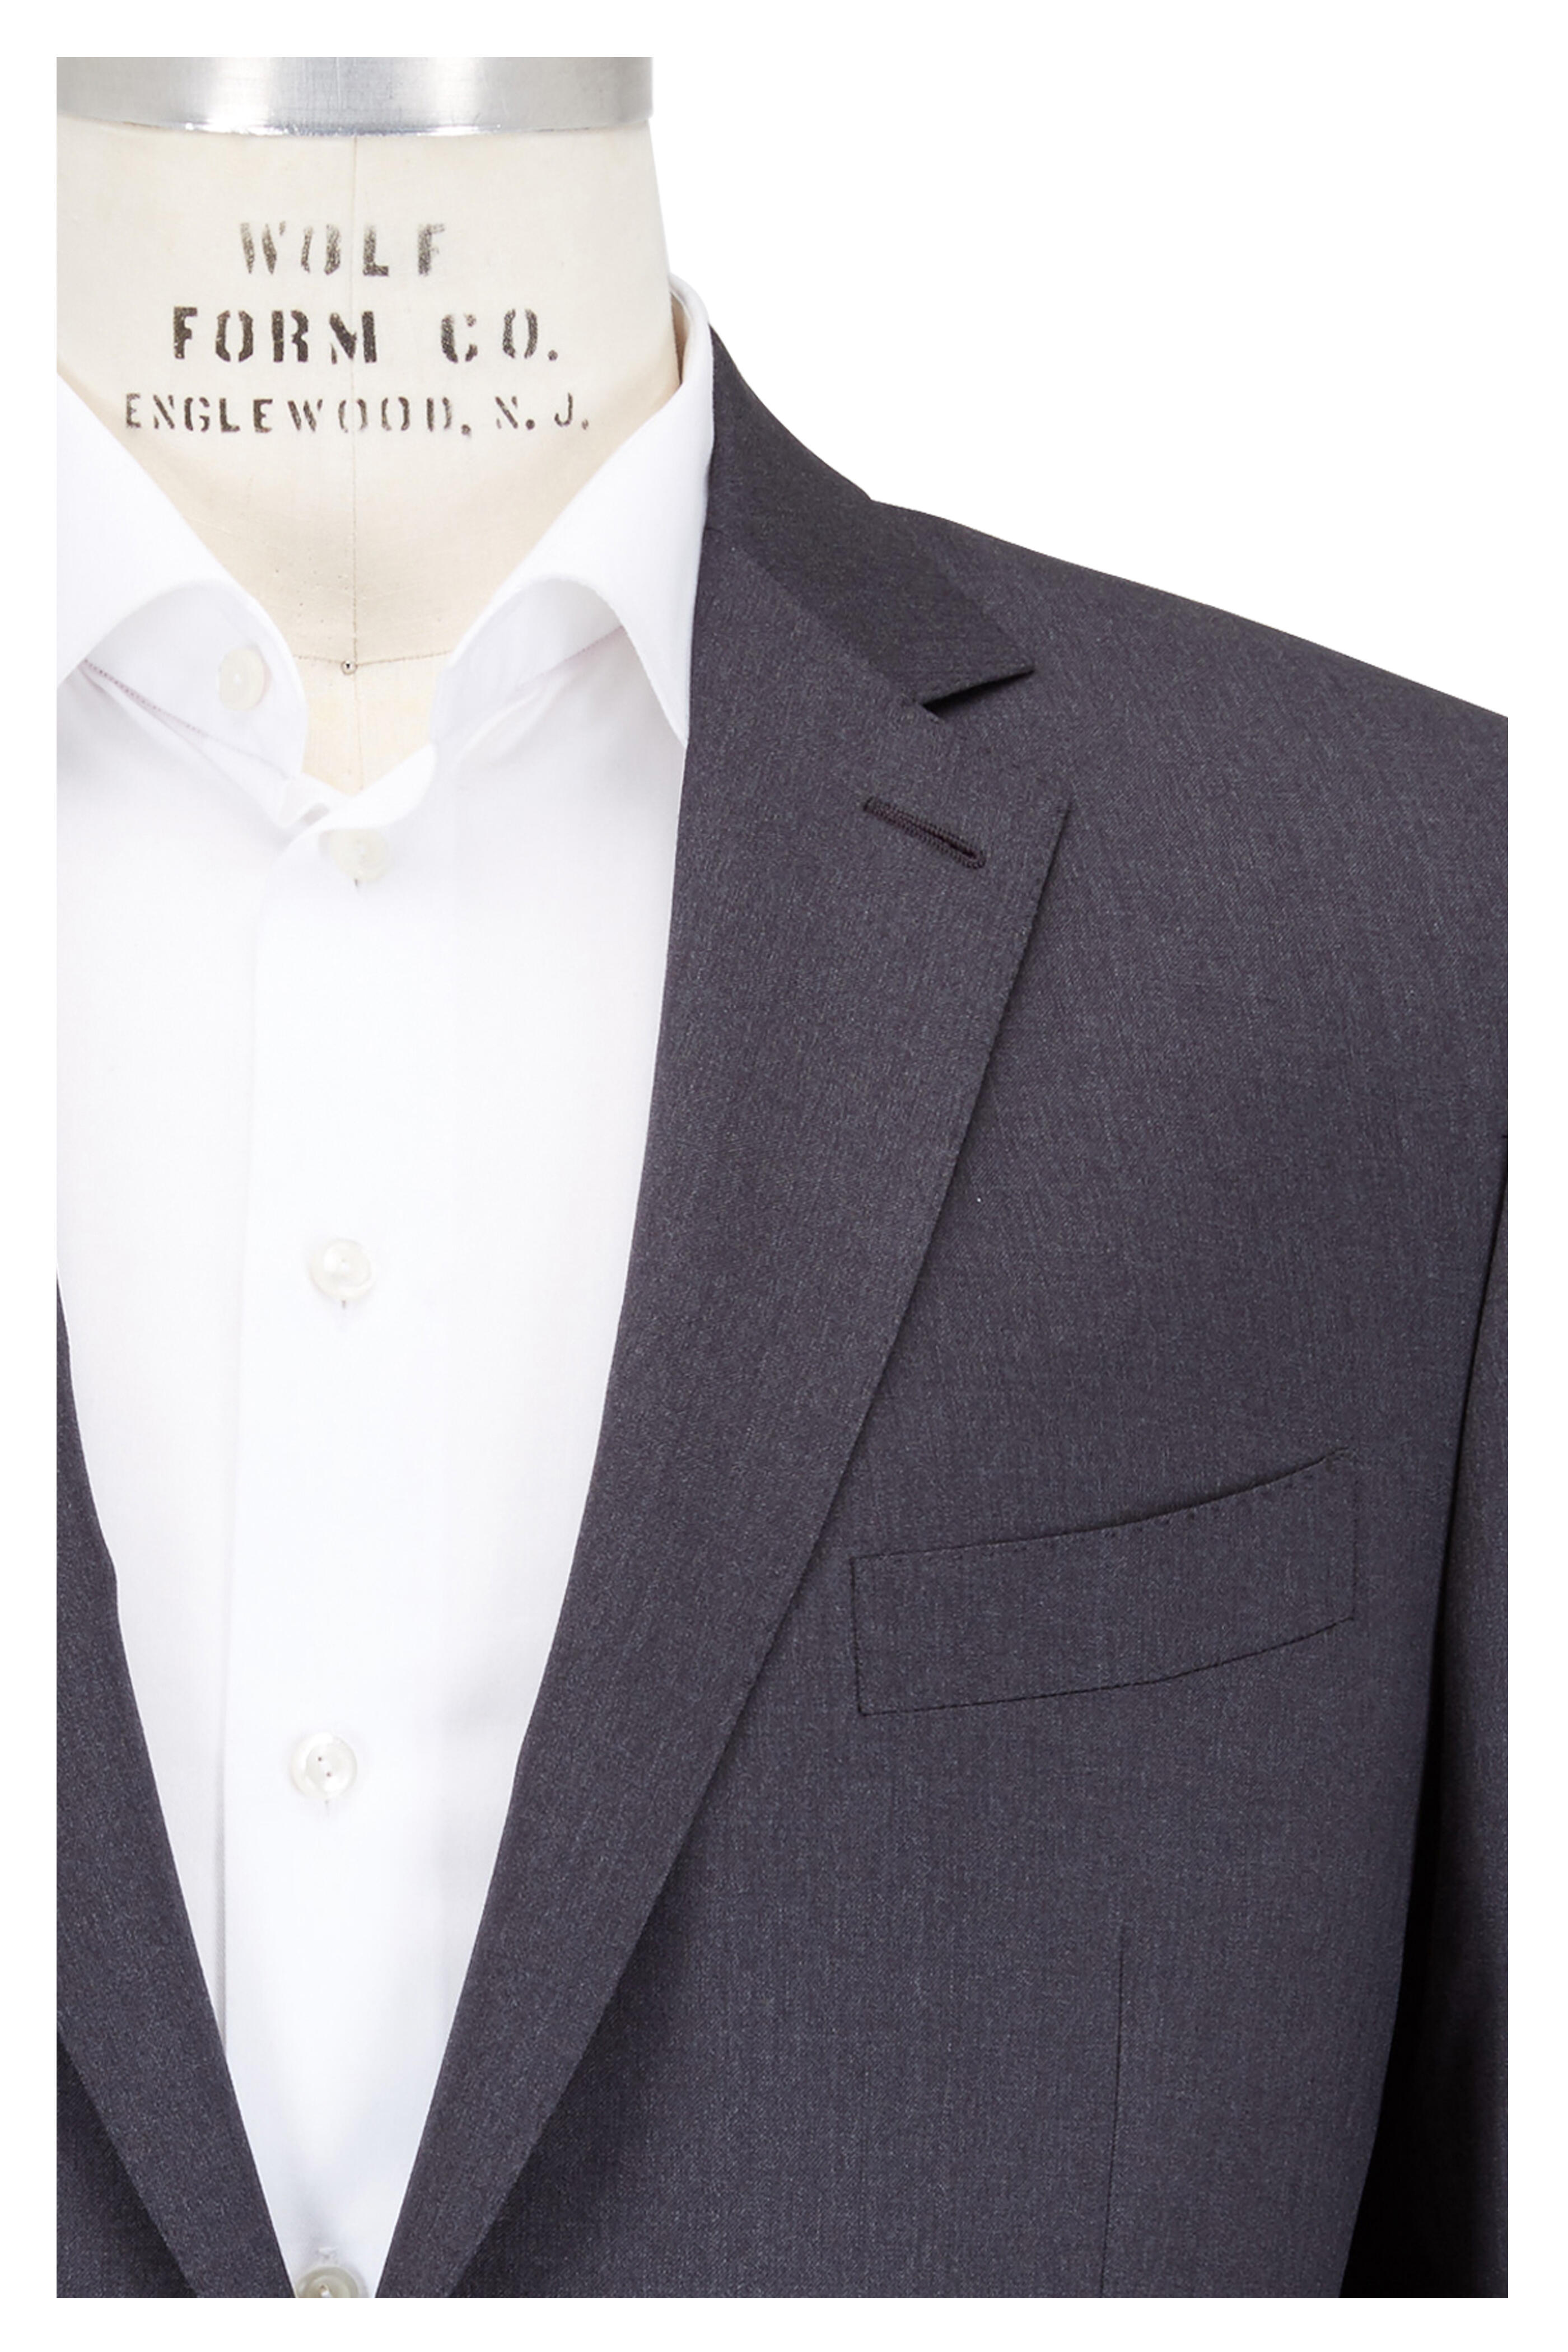 Zegna - Solid Gray Micronsphere Wool Suit | Mitchell Stores